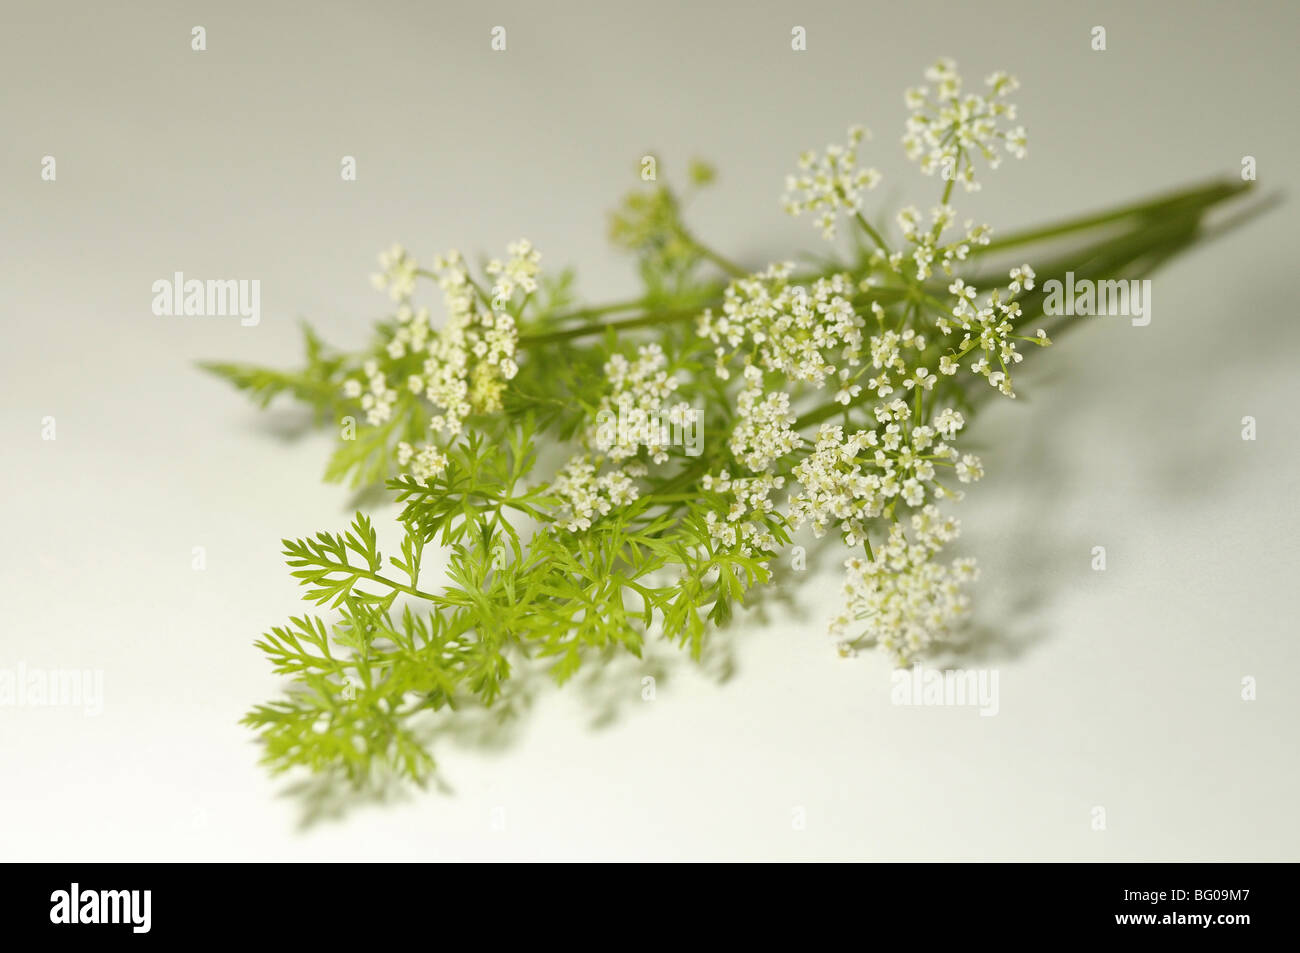 Caraway (Carum carvi). Leaves and flowers, studio picture. Stock Photo